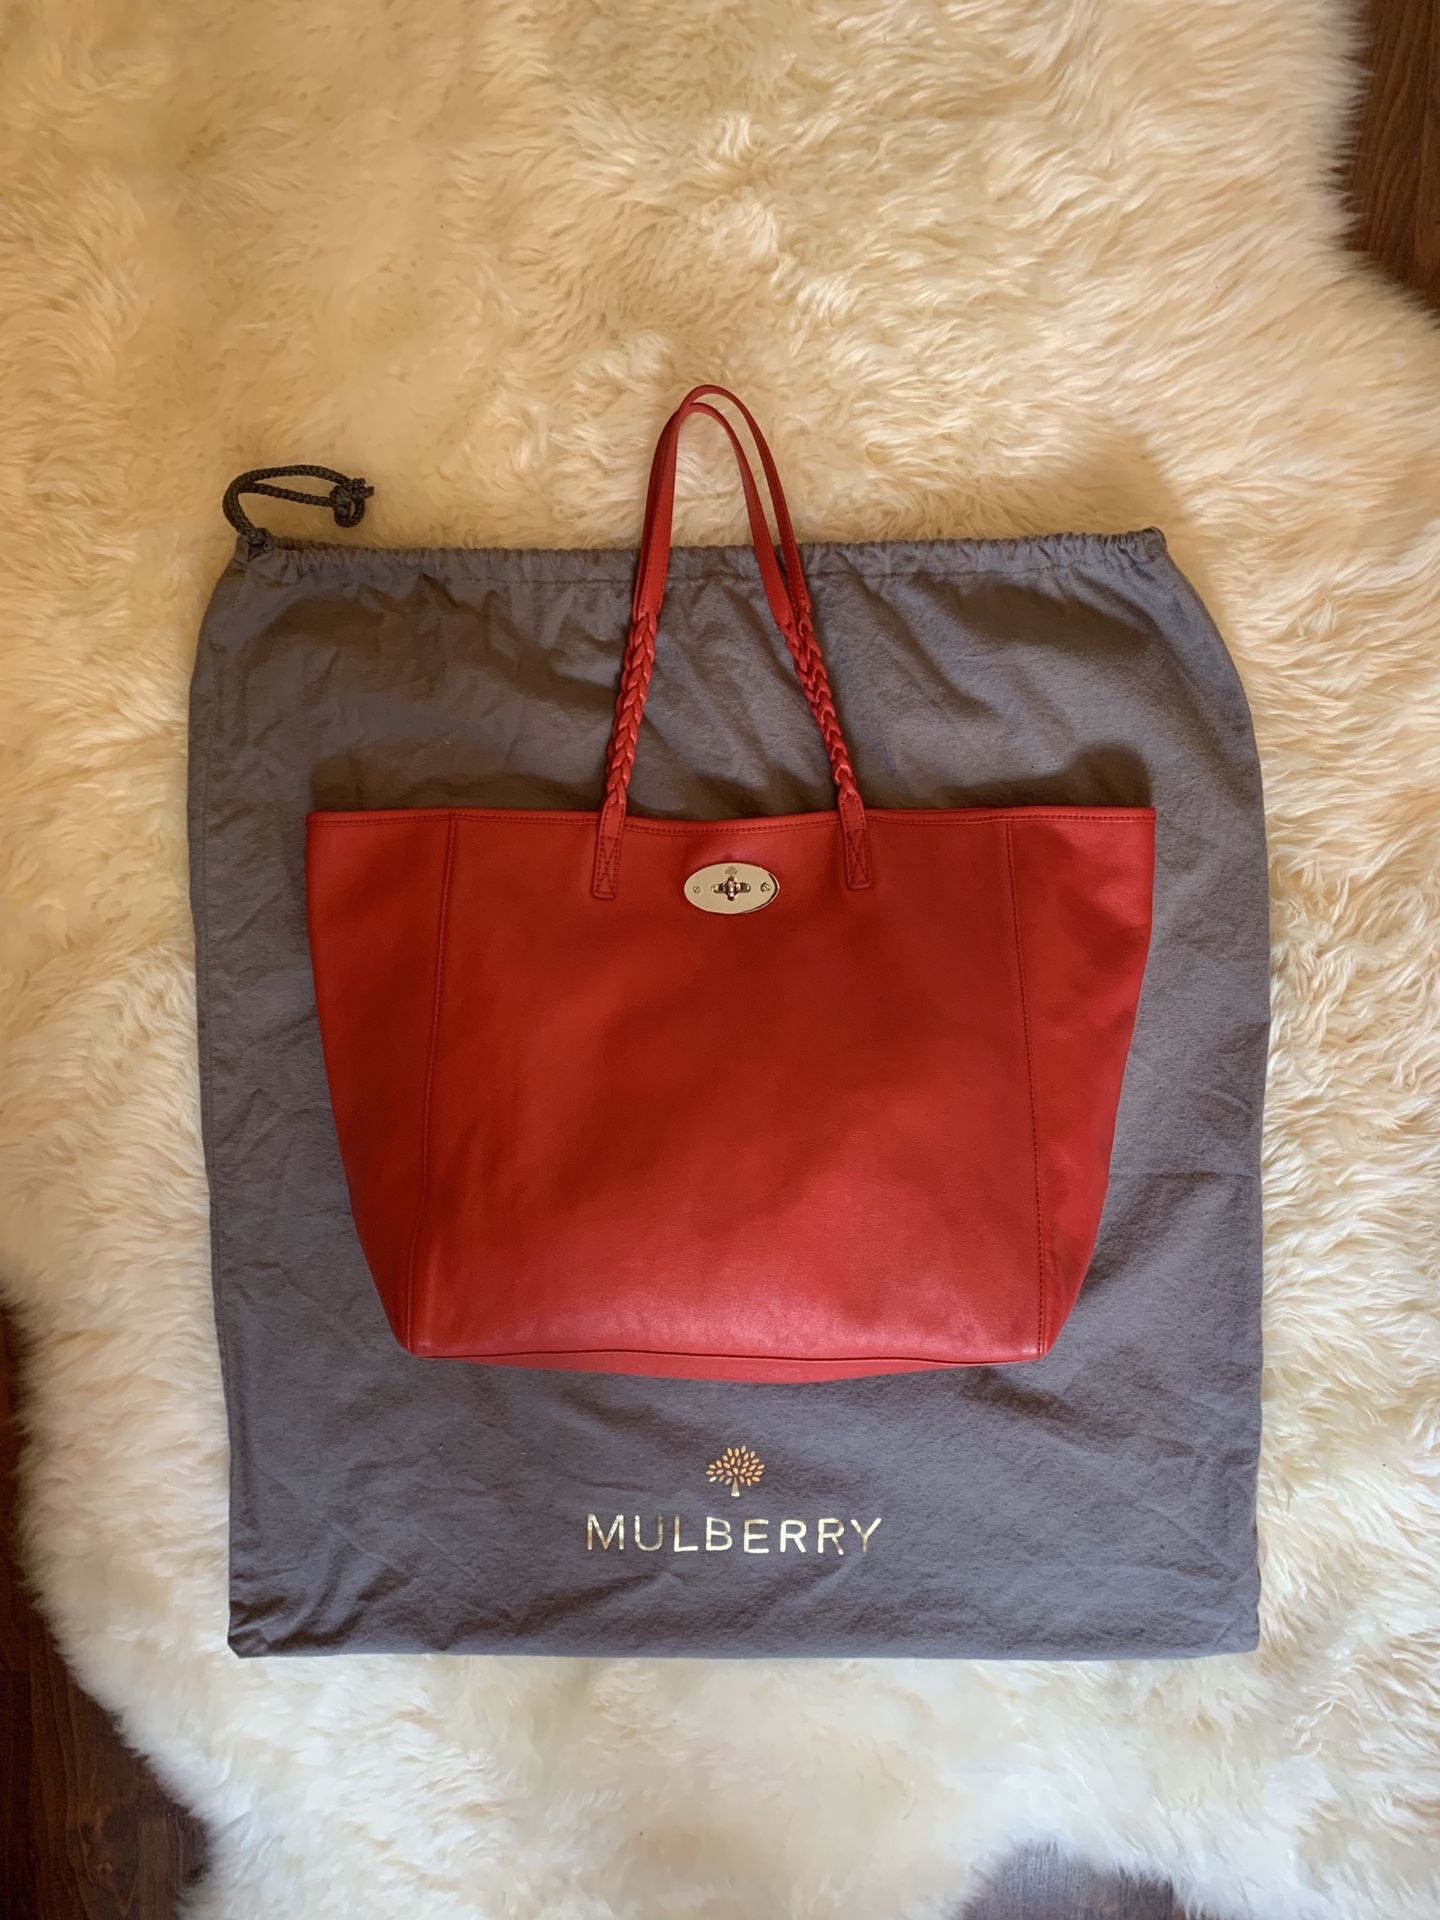 Mulberry Dorset Leather Tote. Light Weight Red. Silver Hardware